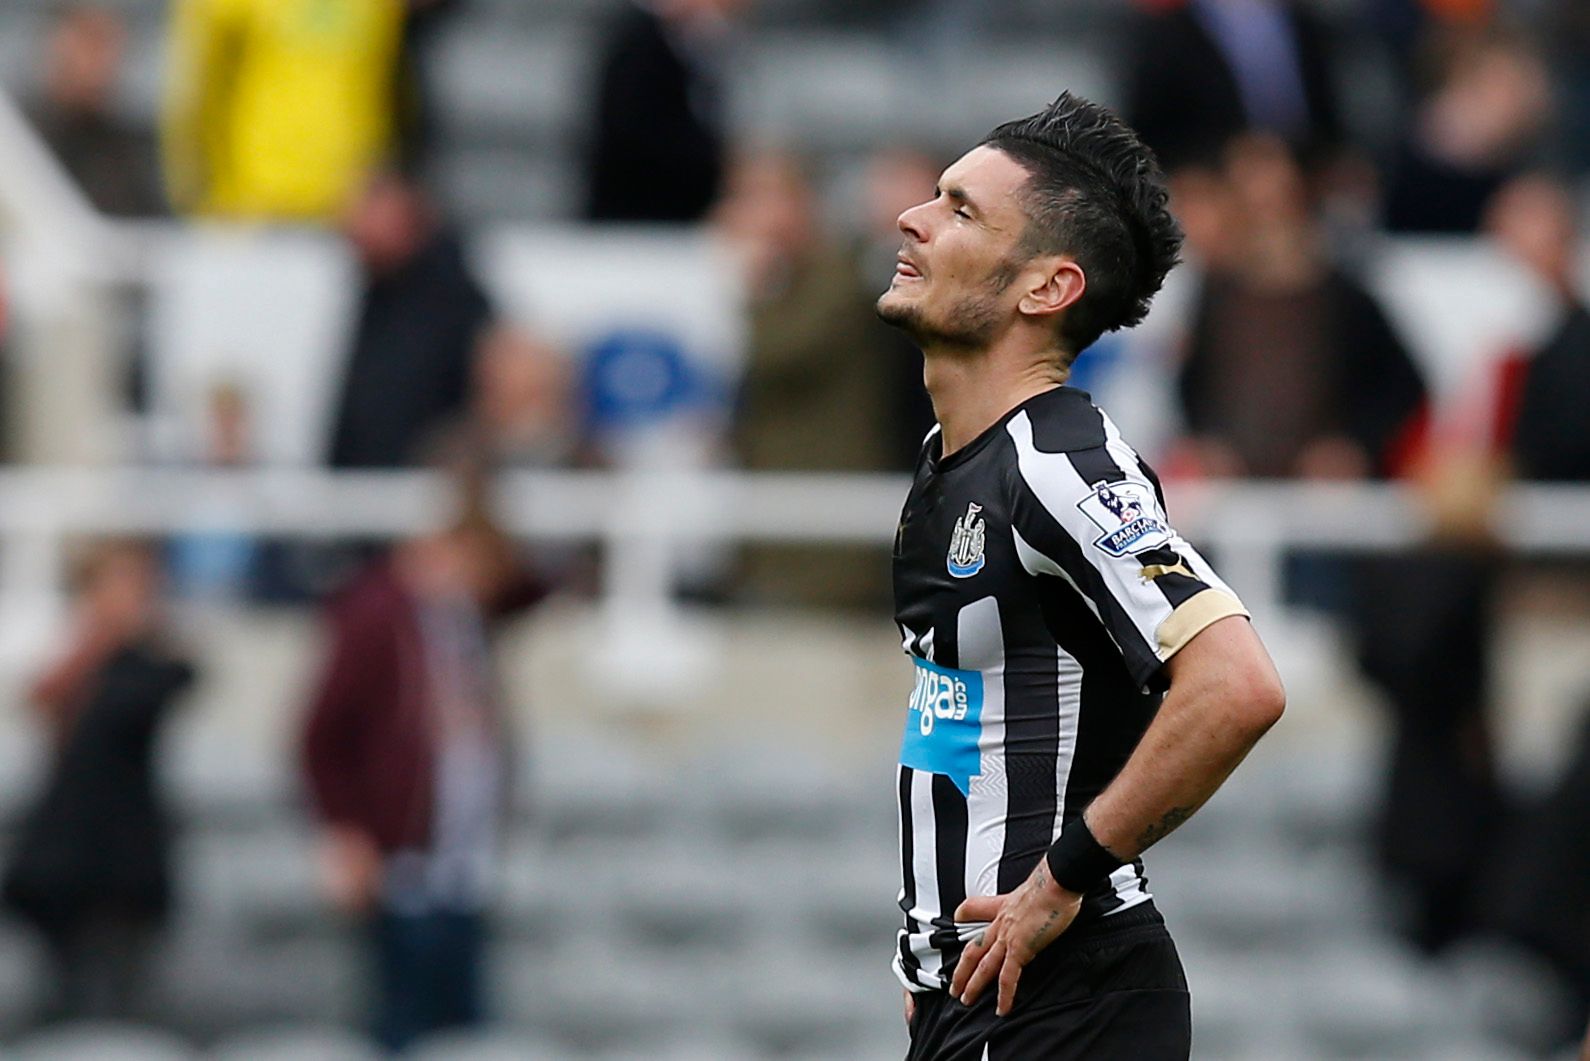 cabella-newcastle-ashley-ligue-1-premier-league-magpiesReuters / Andrew Yates 
Livepic 
EDITORIAL USE ONLY. No use with unauthorized audio, video, data, fixture lists, club/league logos or 